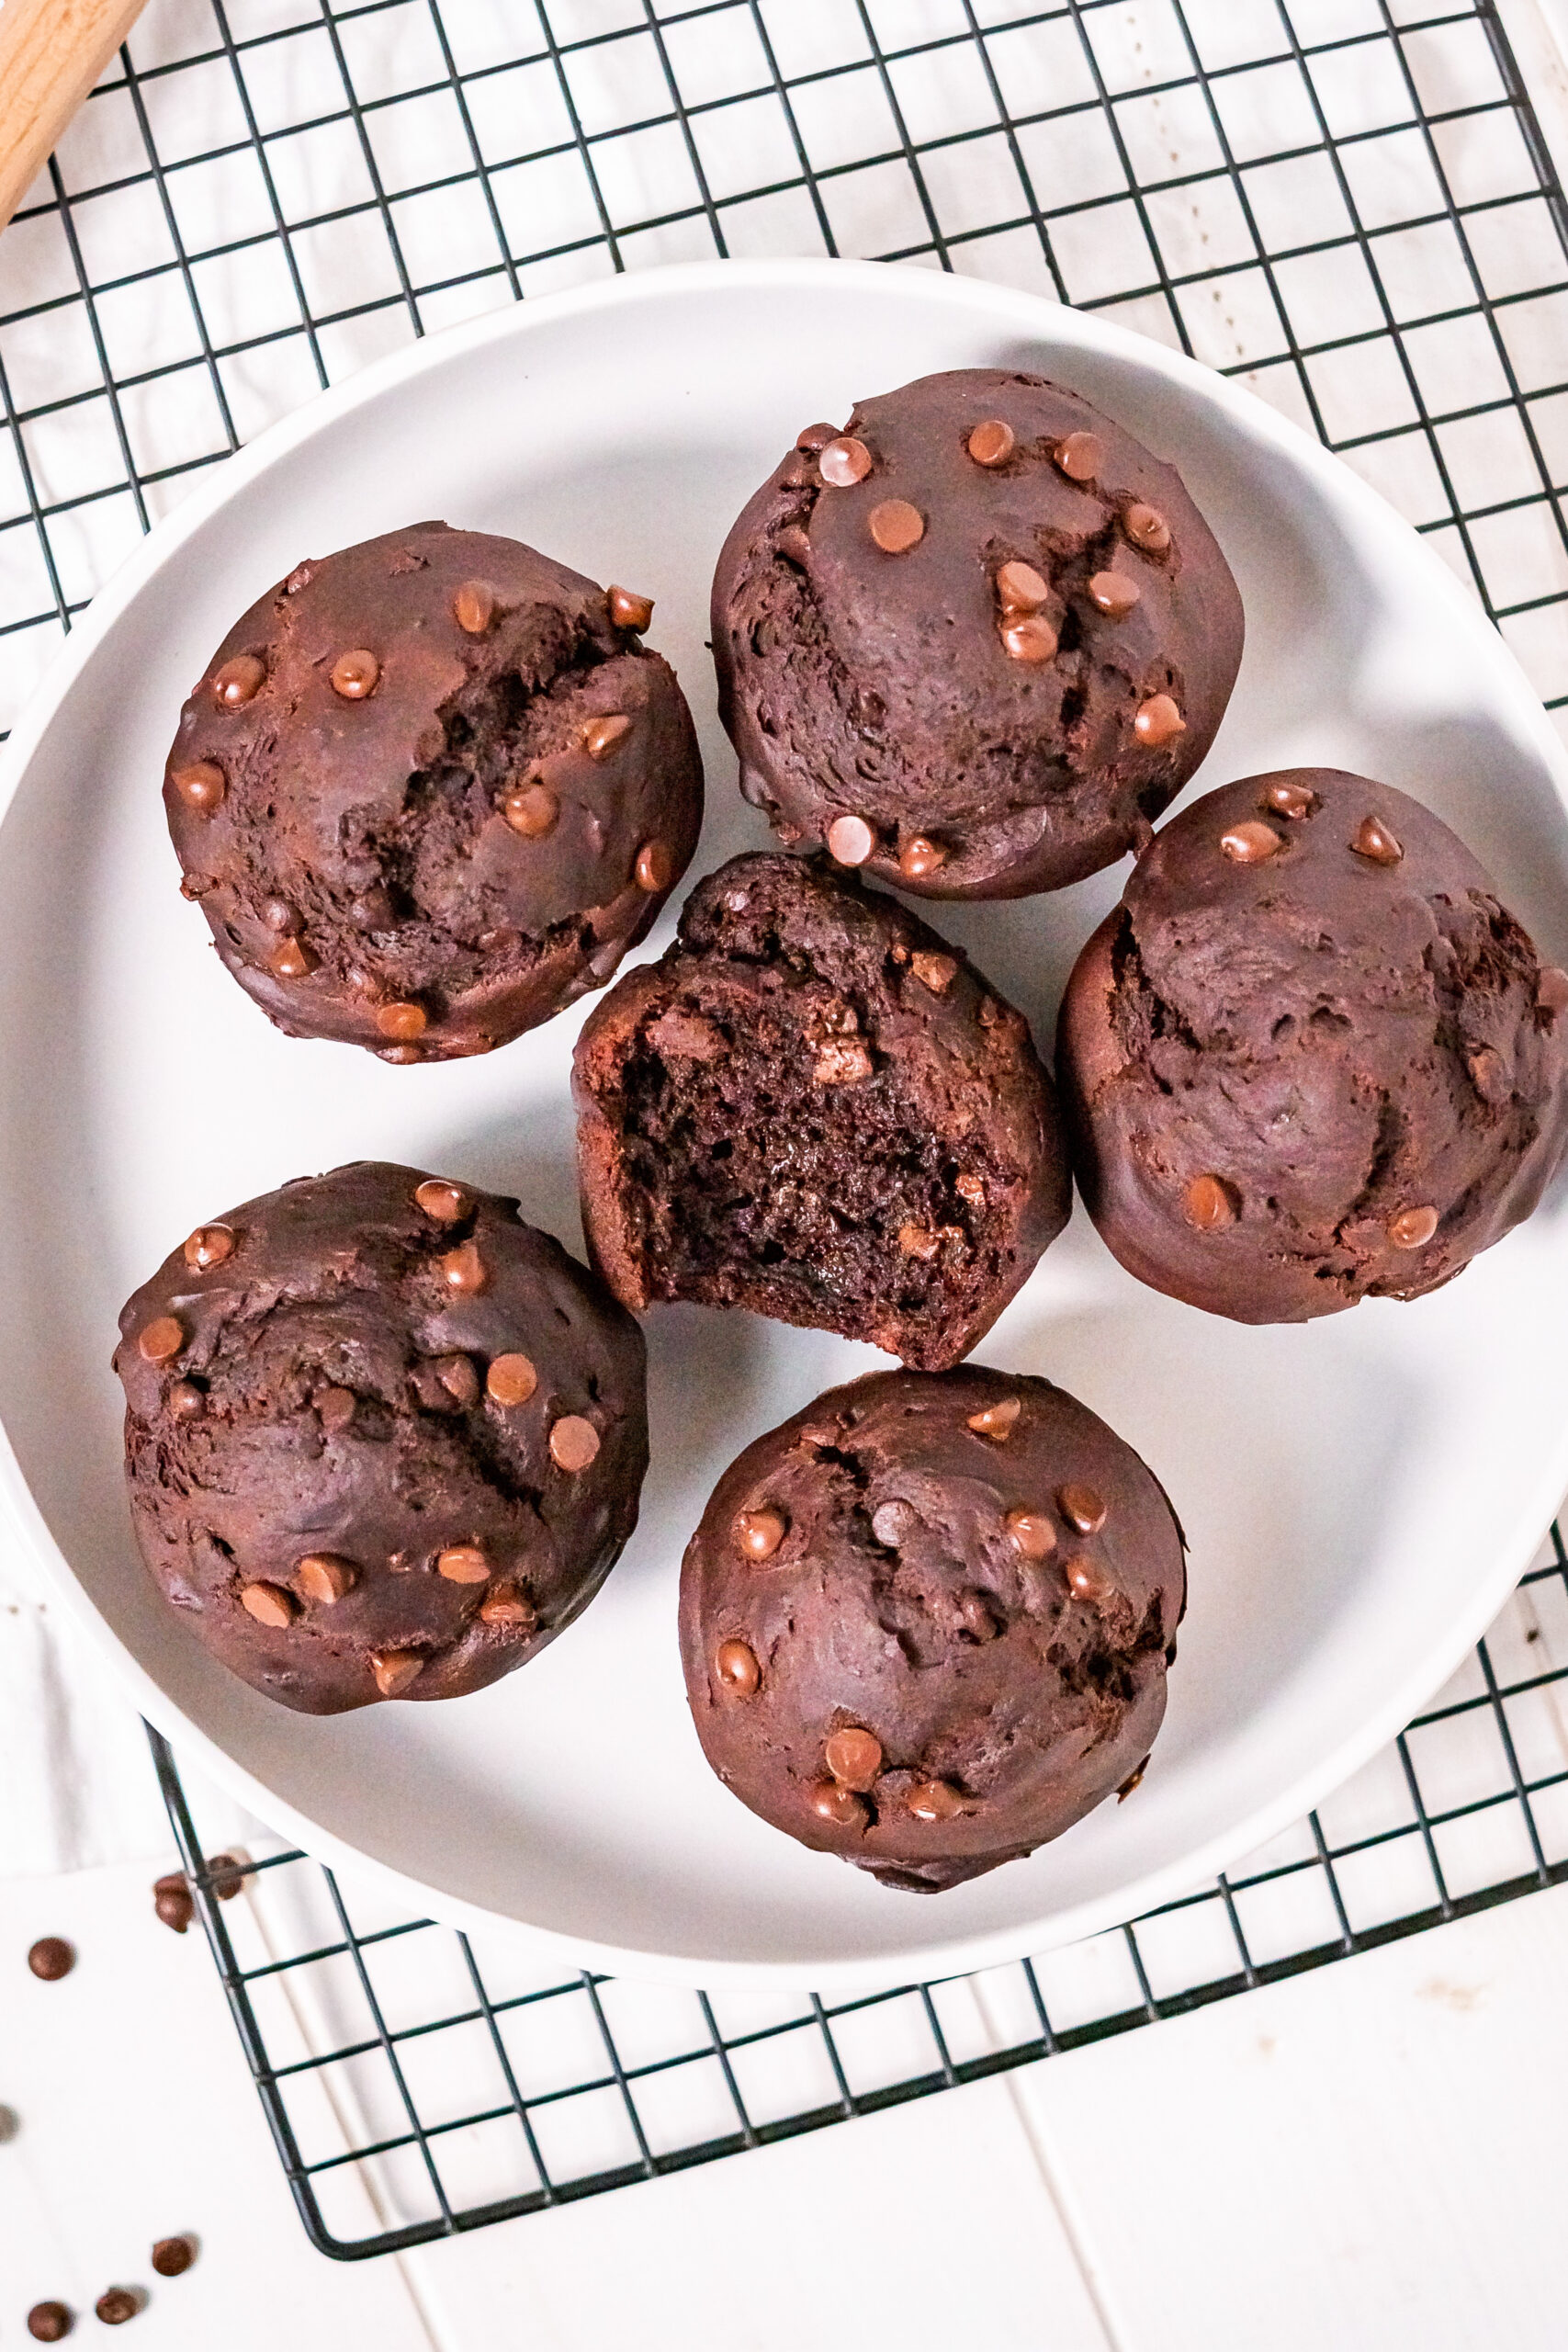 Top view of six gluten free chocolate muffins in a dish with a bite out of one to show the texture.